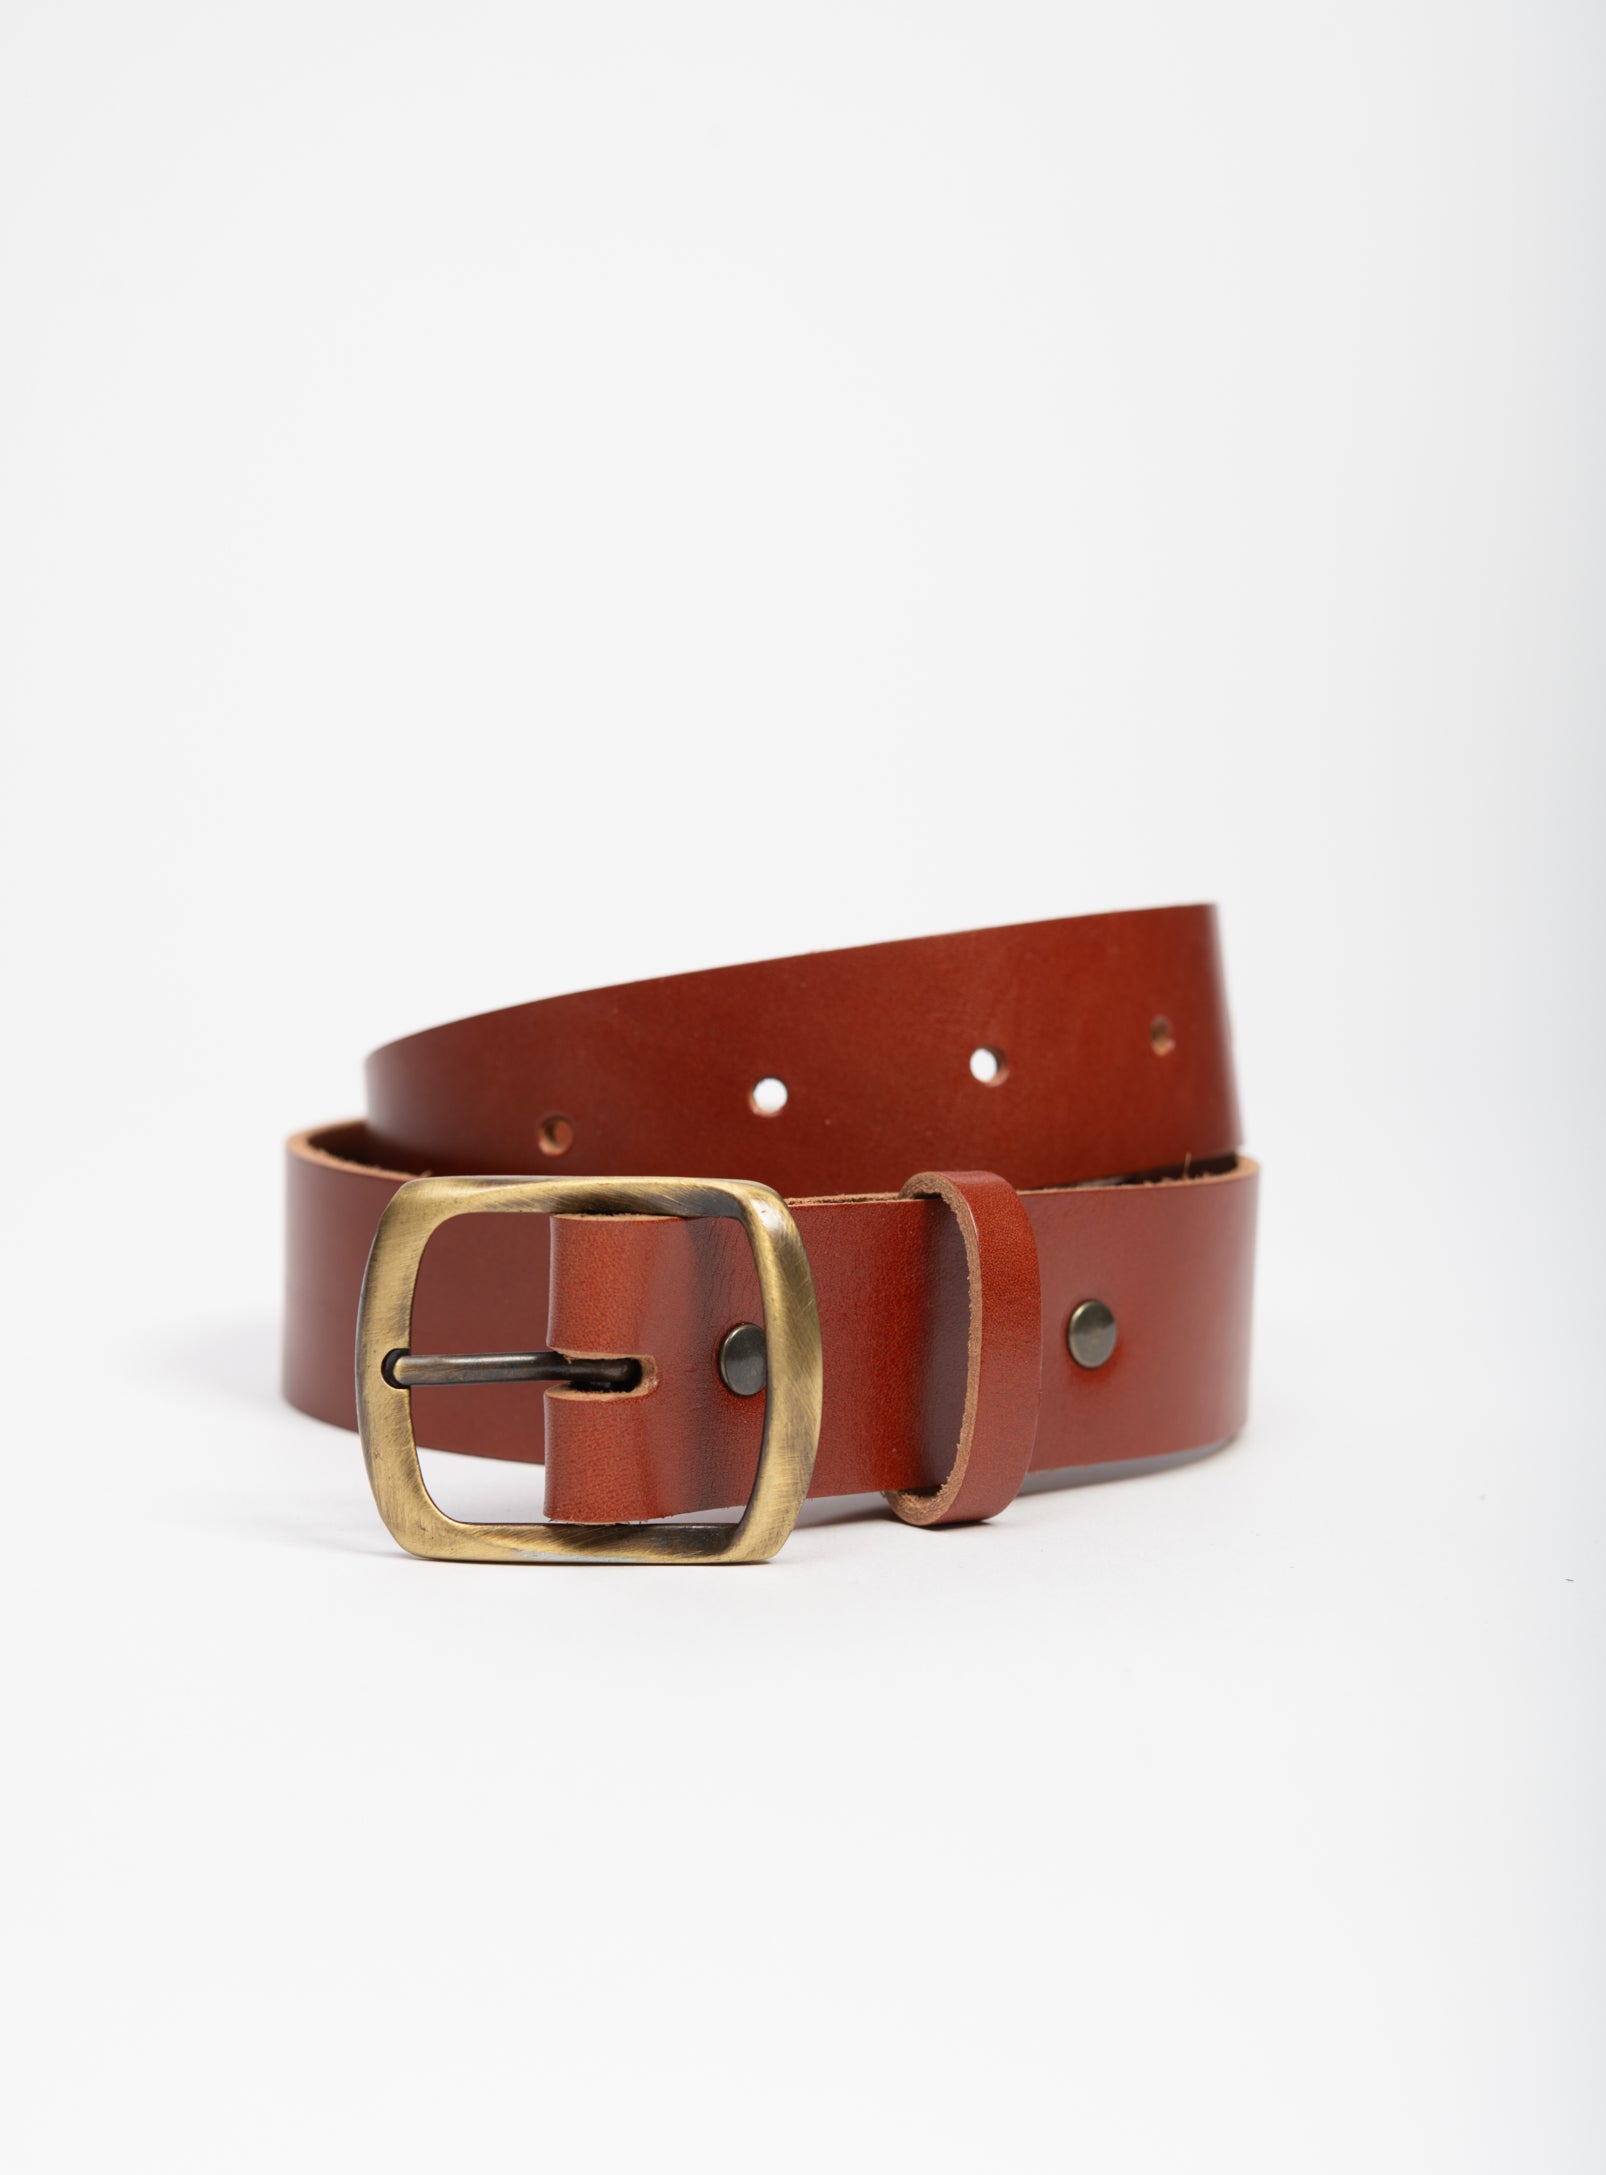 Leather belt with solid brass buckle by Veinage, handmade in Montreal, Canada